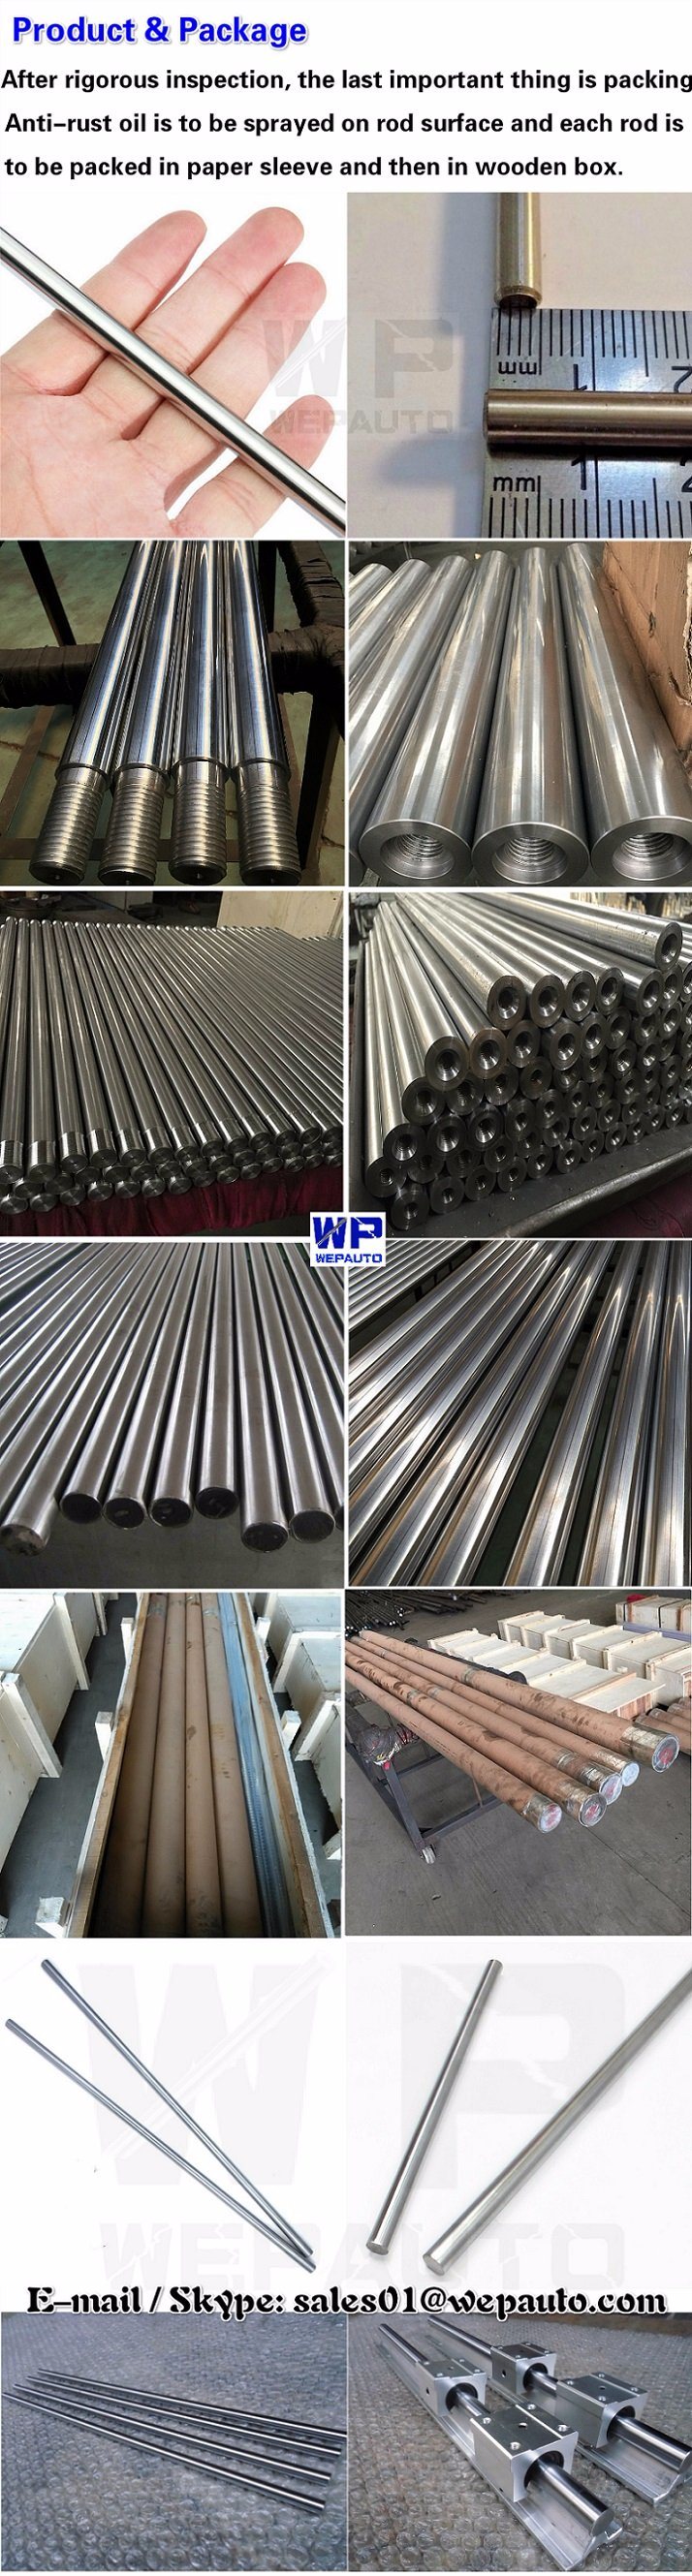 Induction Hardened Rods Linear Shafts for Industrial 3D Printer